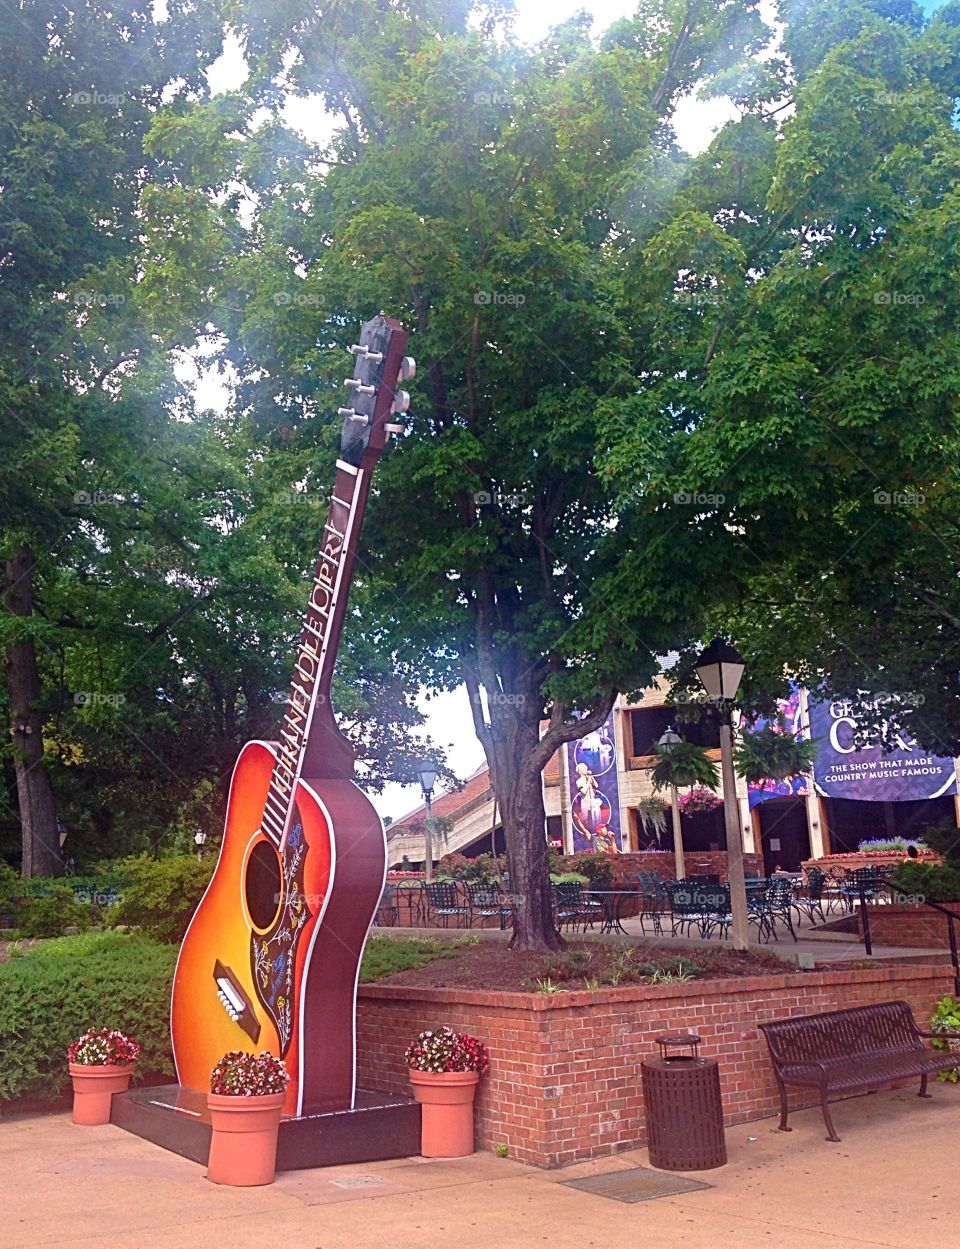 Giant Guitar. Outside of the Grand Ole Opry